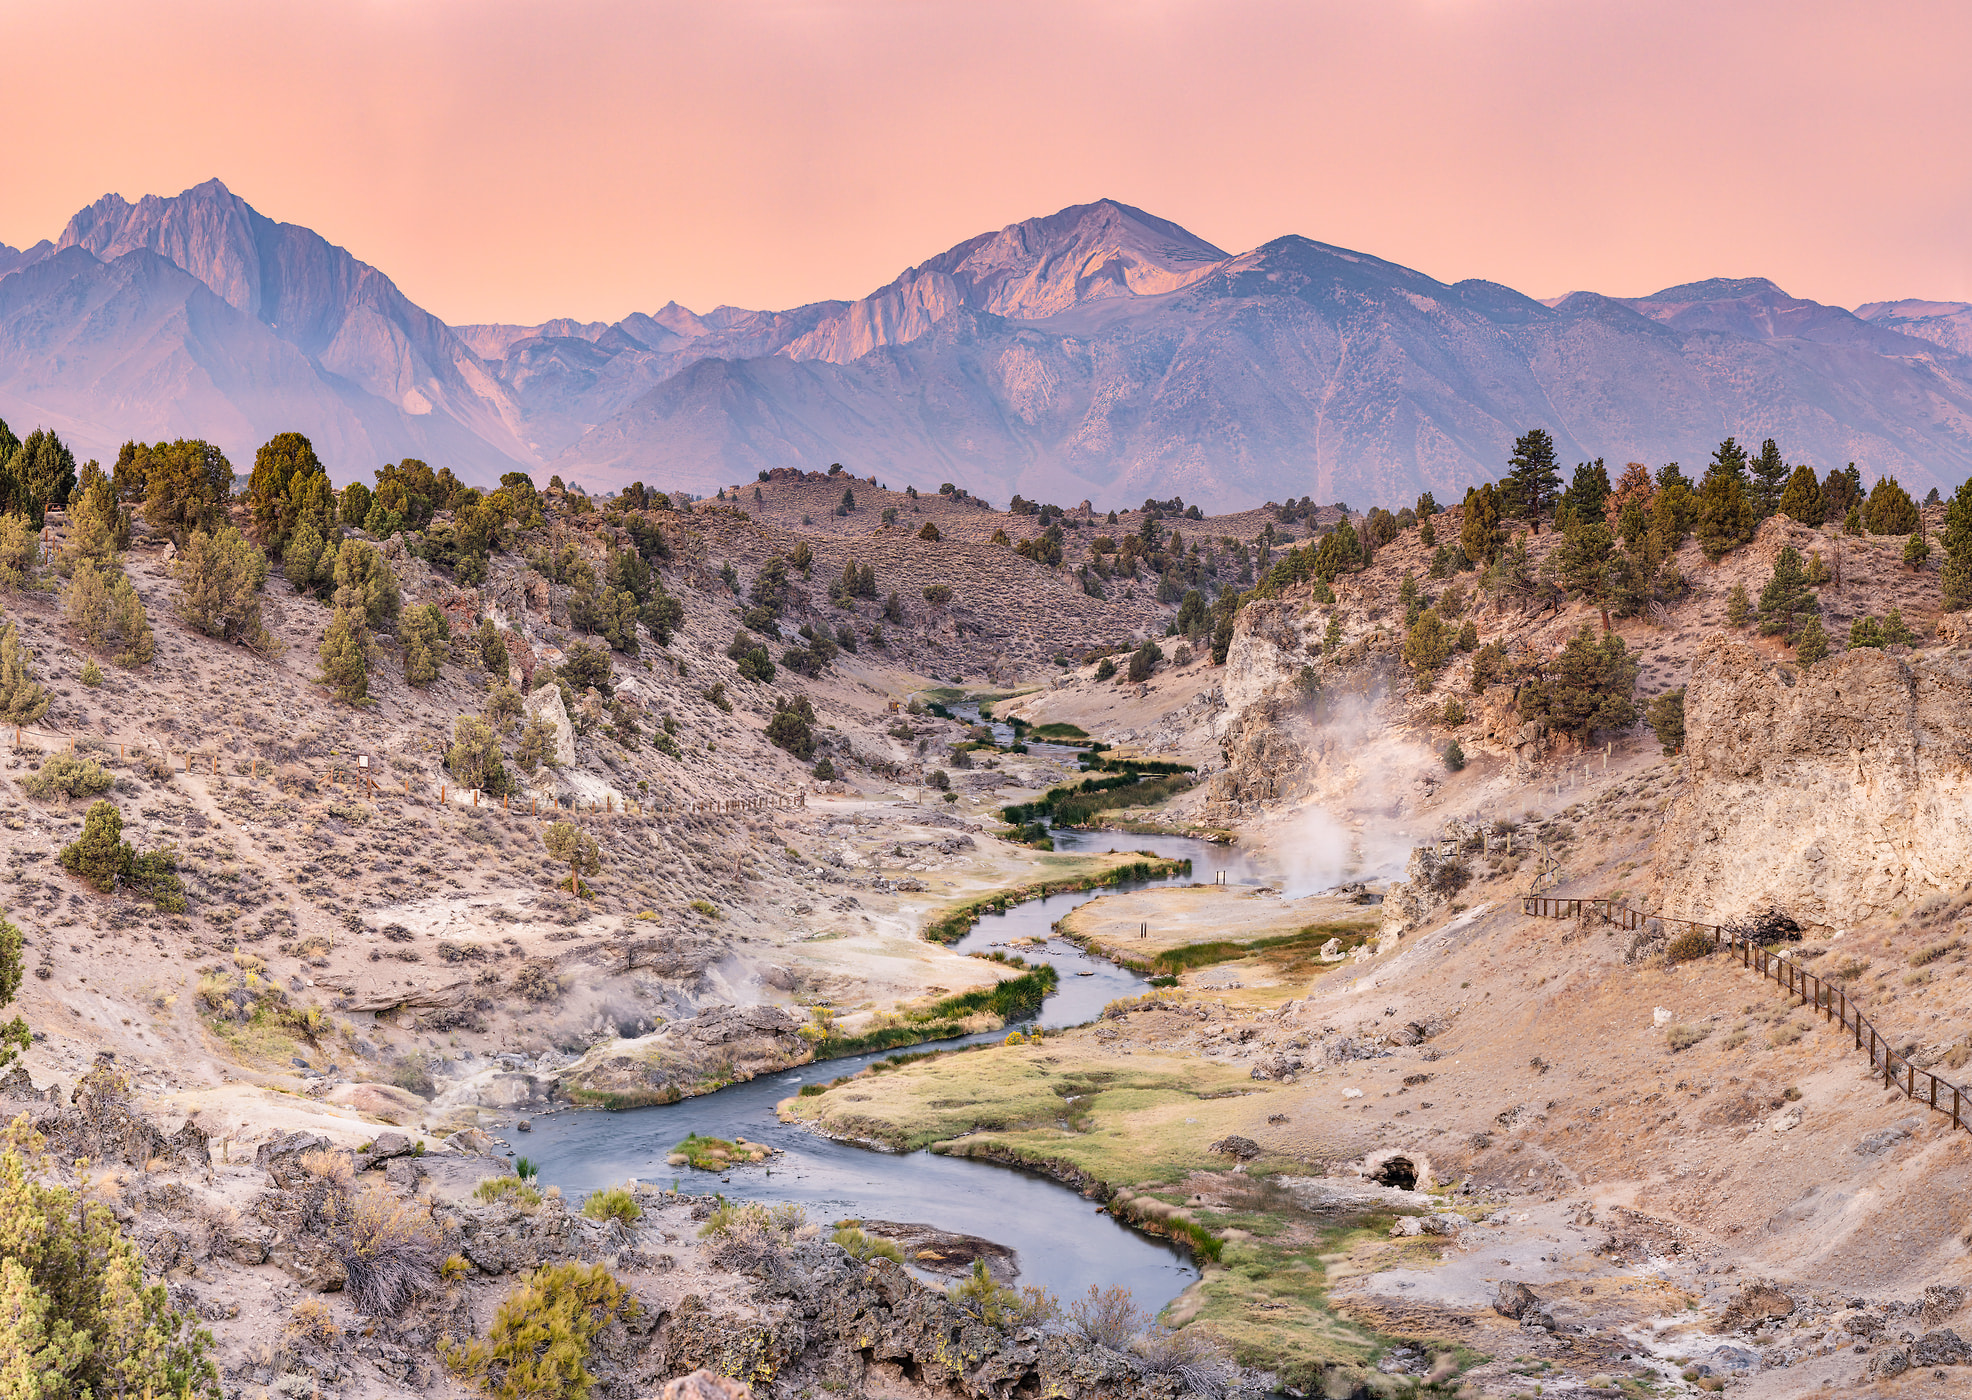 439 megapixels! A very high resolution, large-format VAST photo print of a pastel-colored landscape; photograph created by Chris Blake in Mammoth Lakes, California